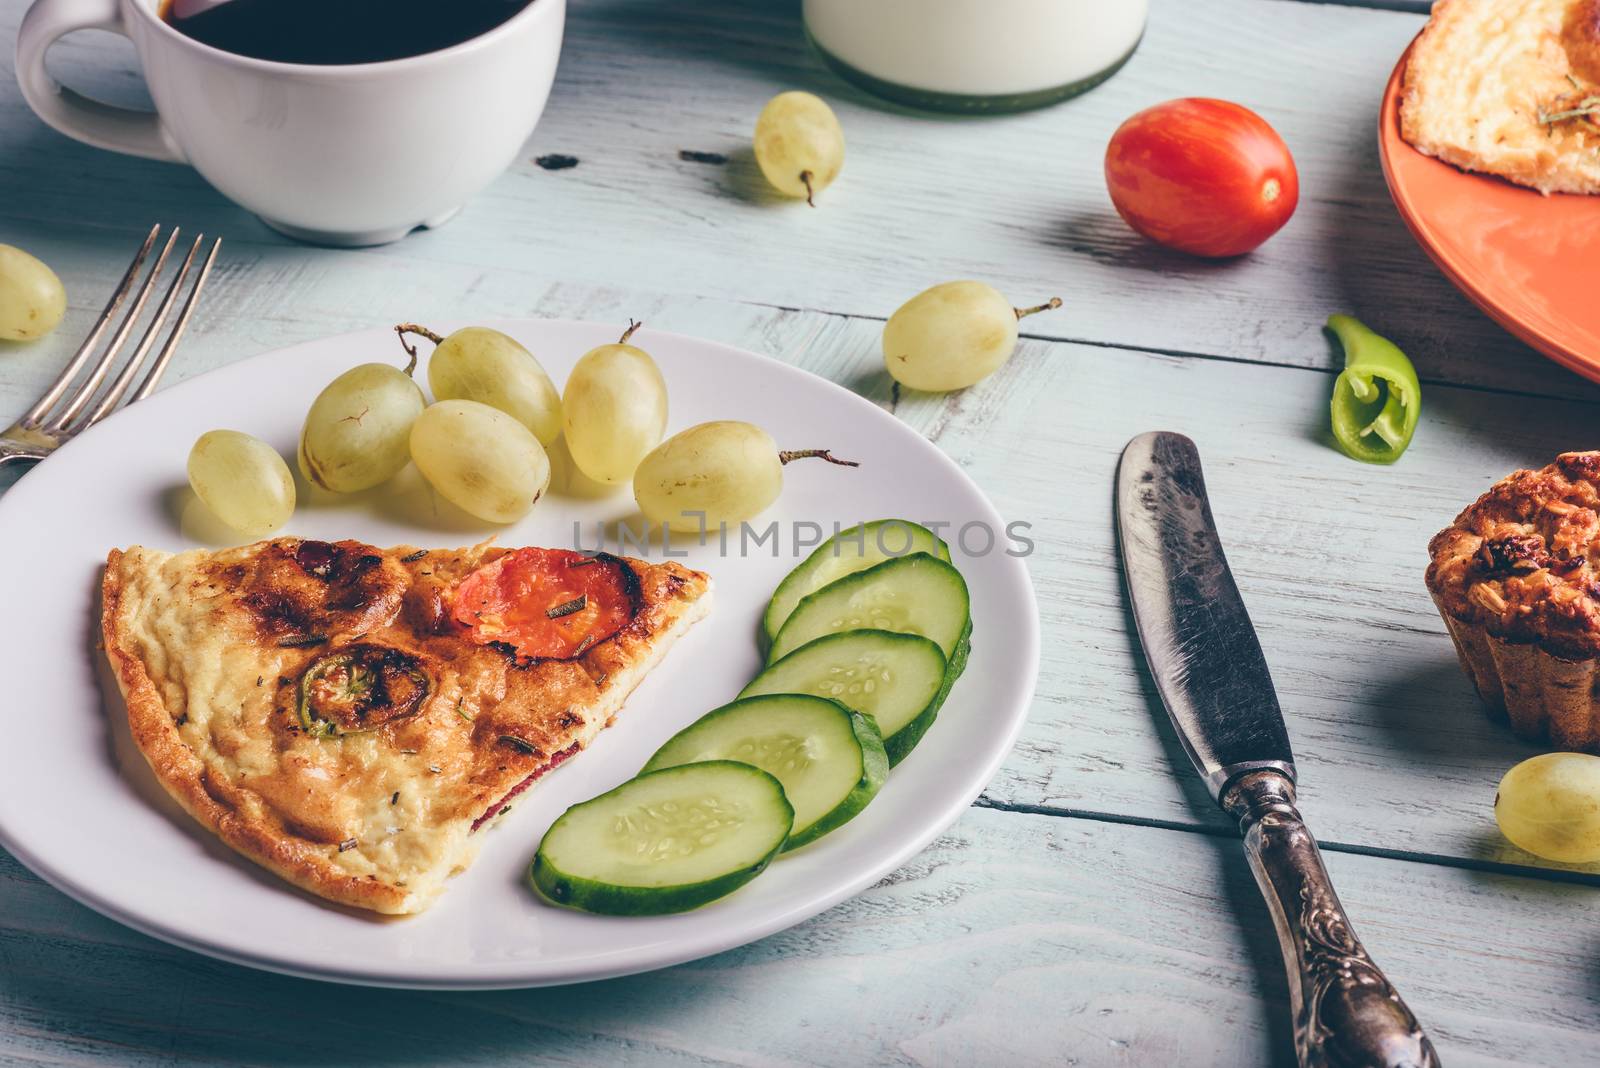 Slice of frittata with cup of coffee, grapes and muffins over light wooden background. Healthy eating concept.